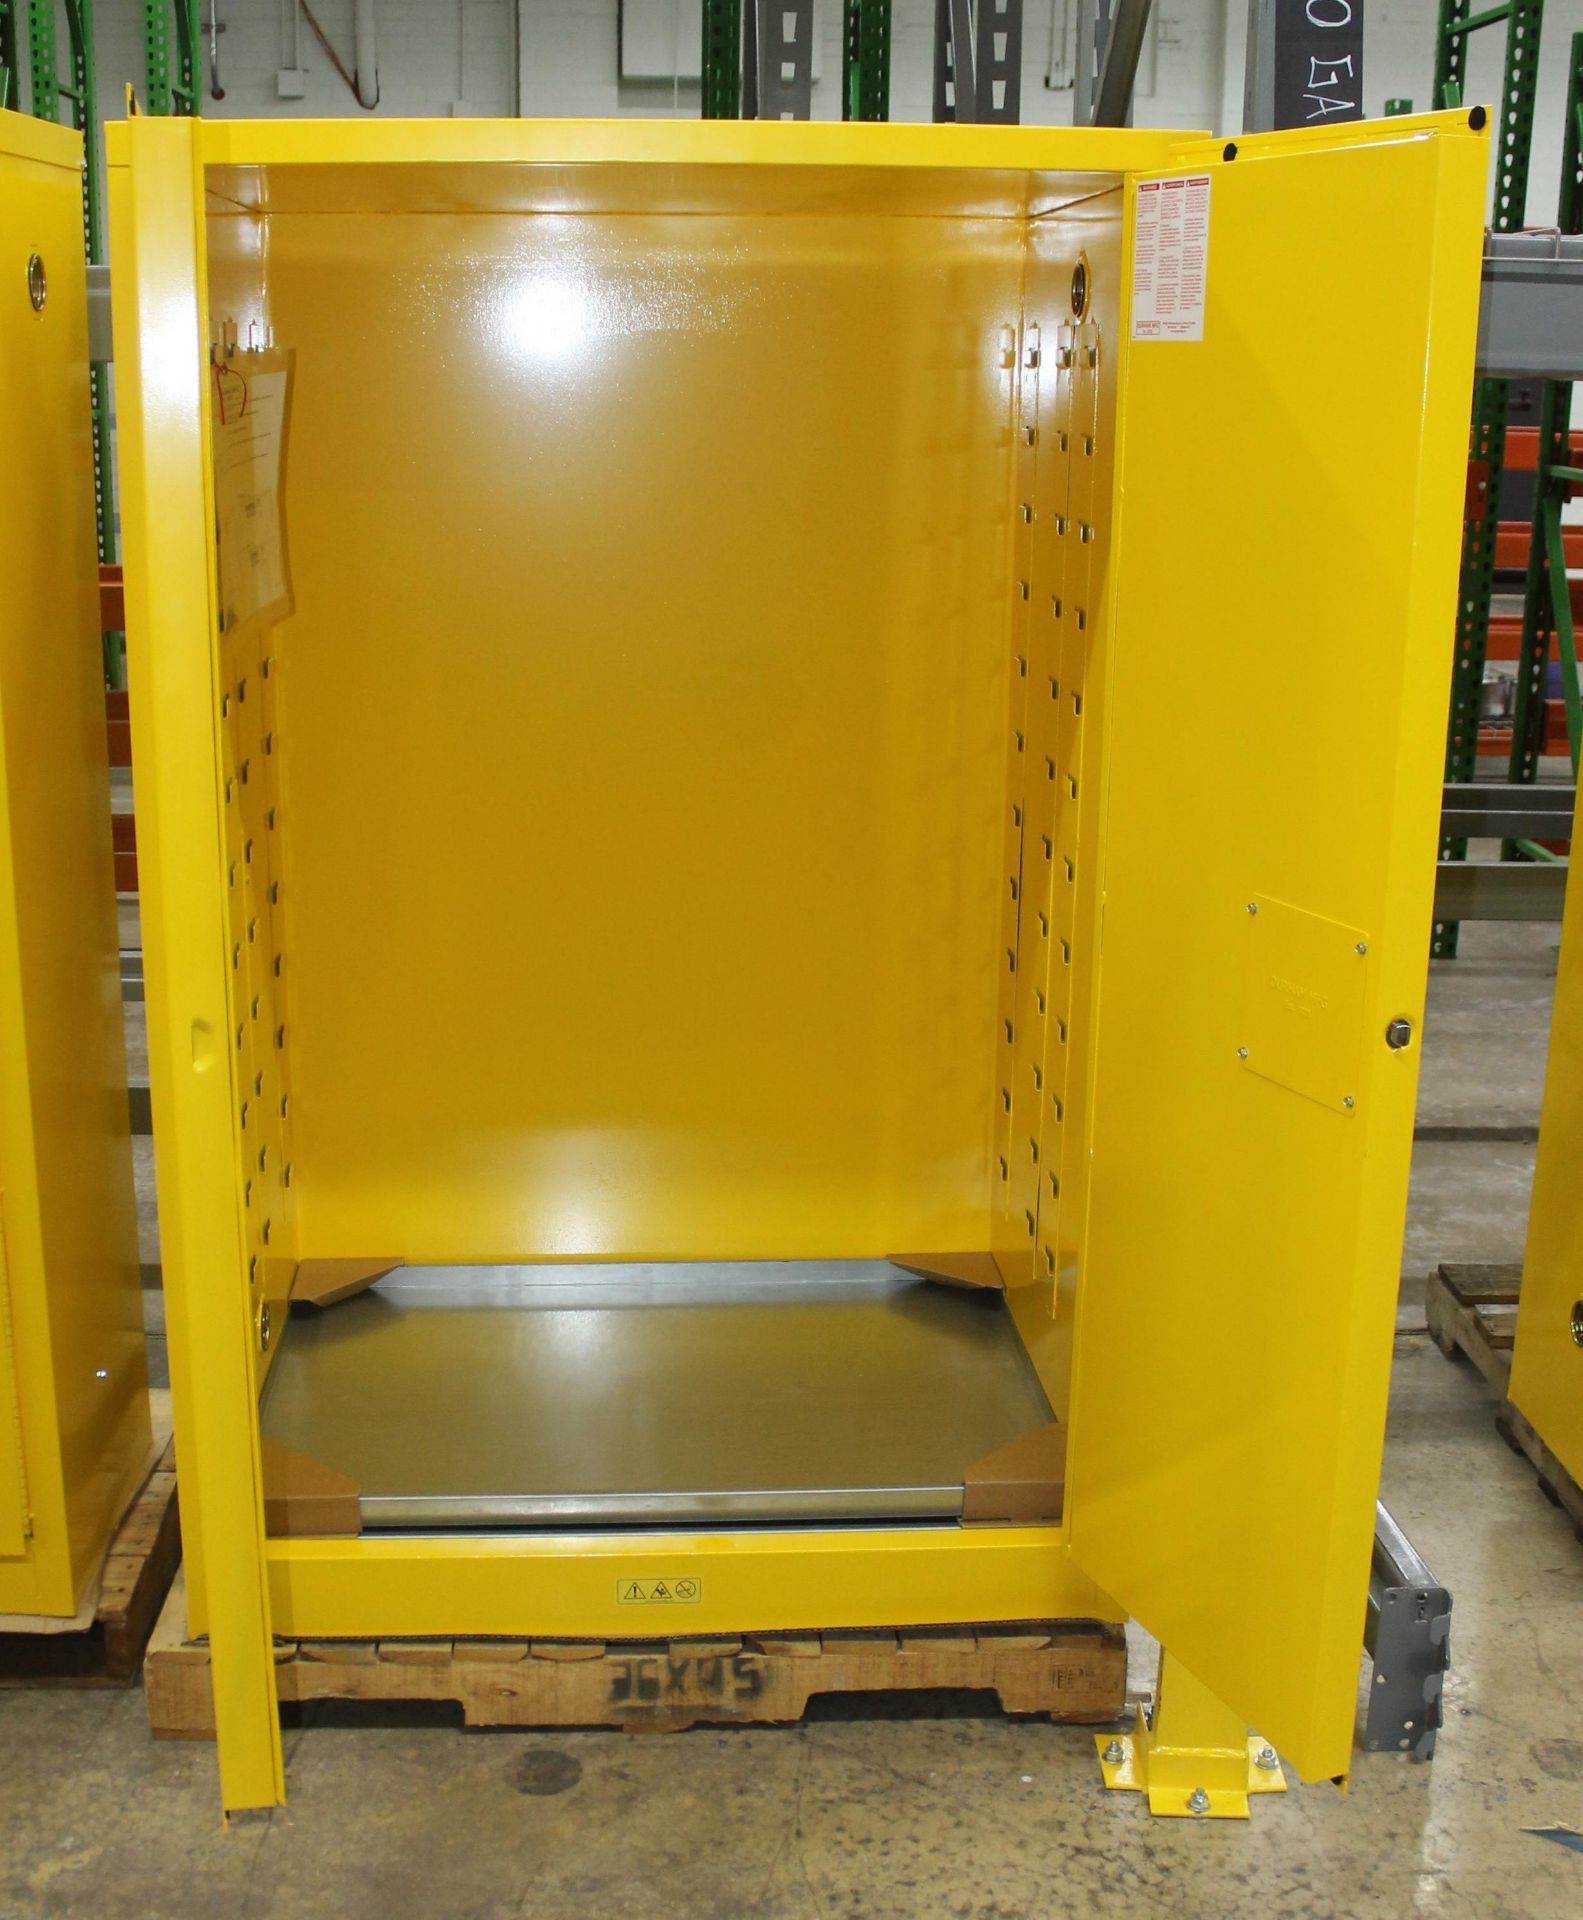 90 GALLON FLAMMABLE SAFETY STORAGE CABINET, NEW - Image 2 of 3